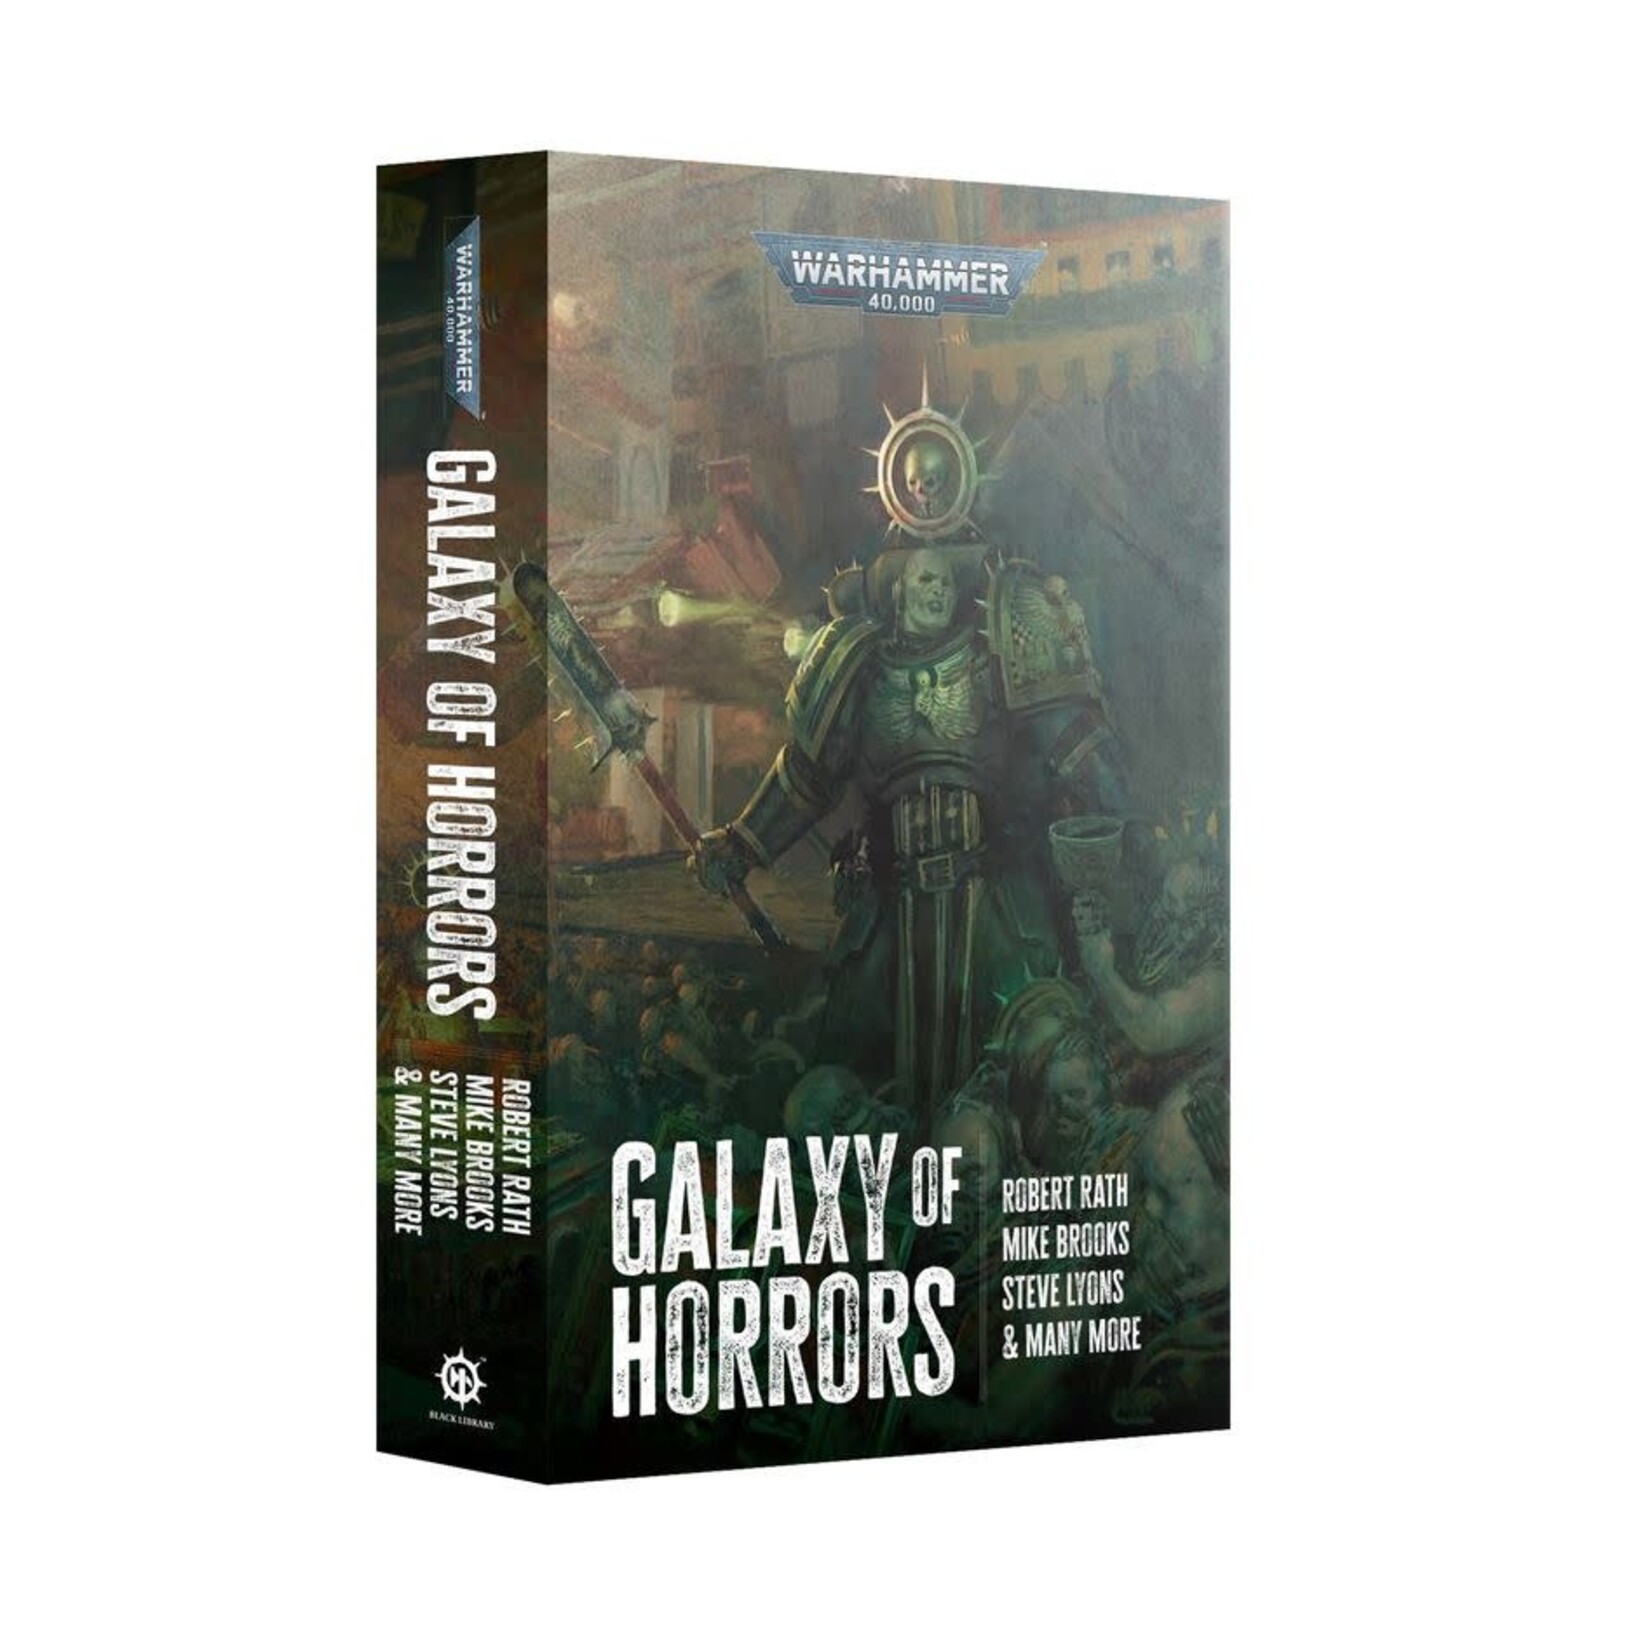 Galaxy of Horrors PaperBack